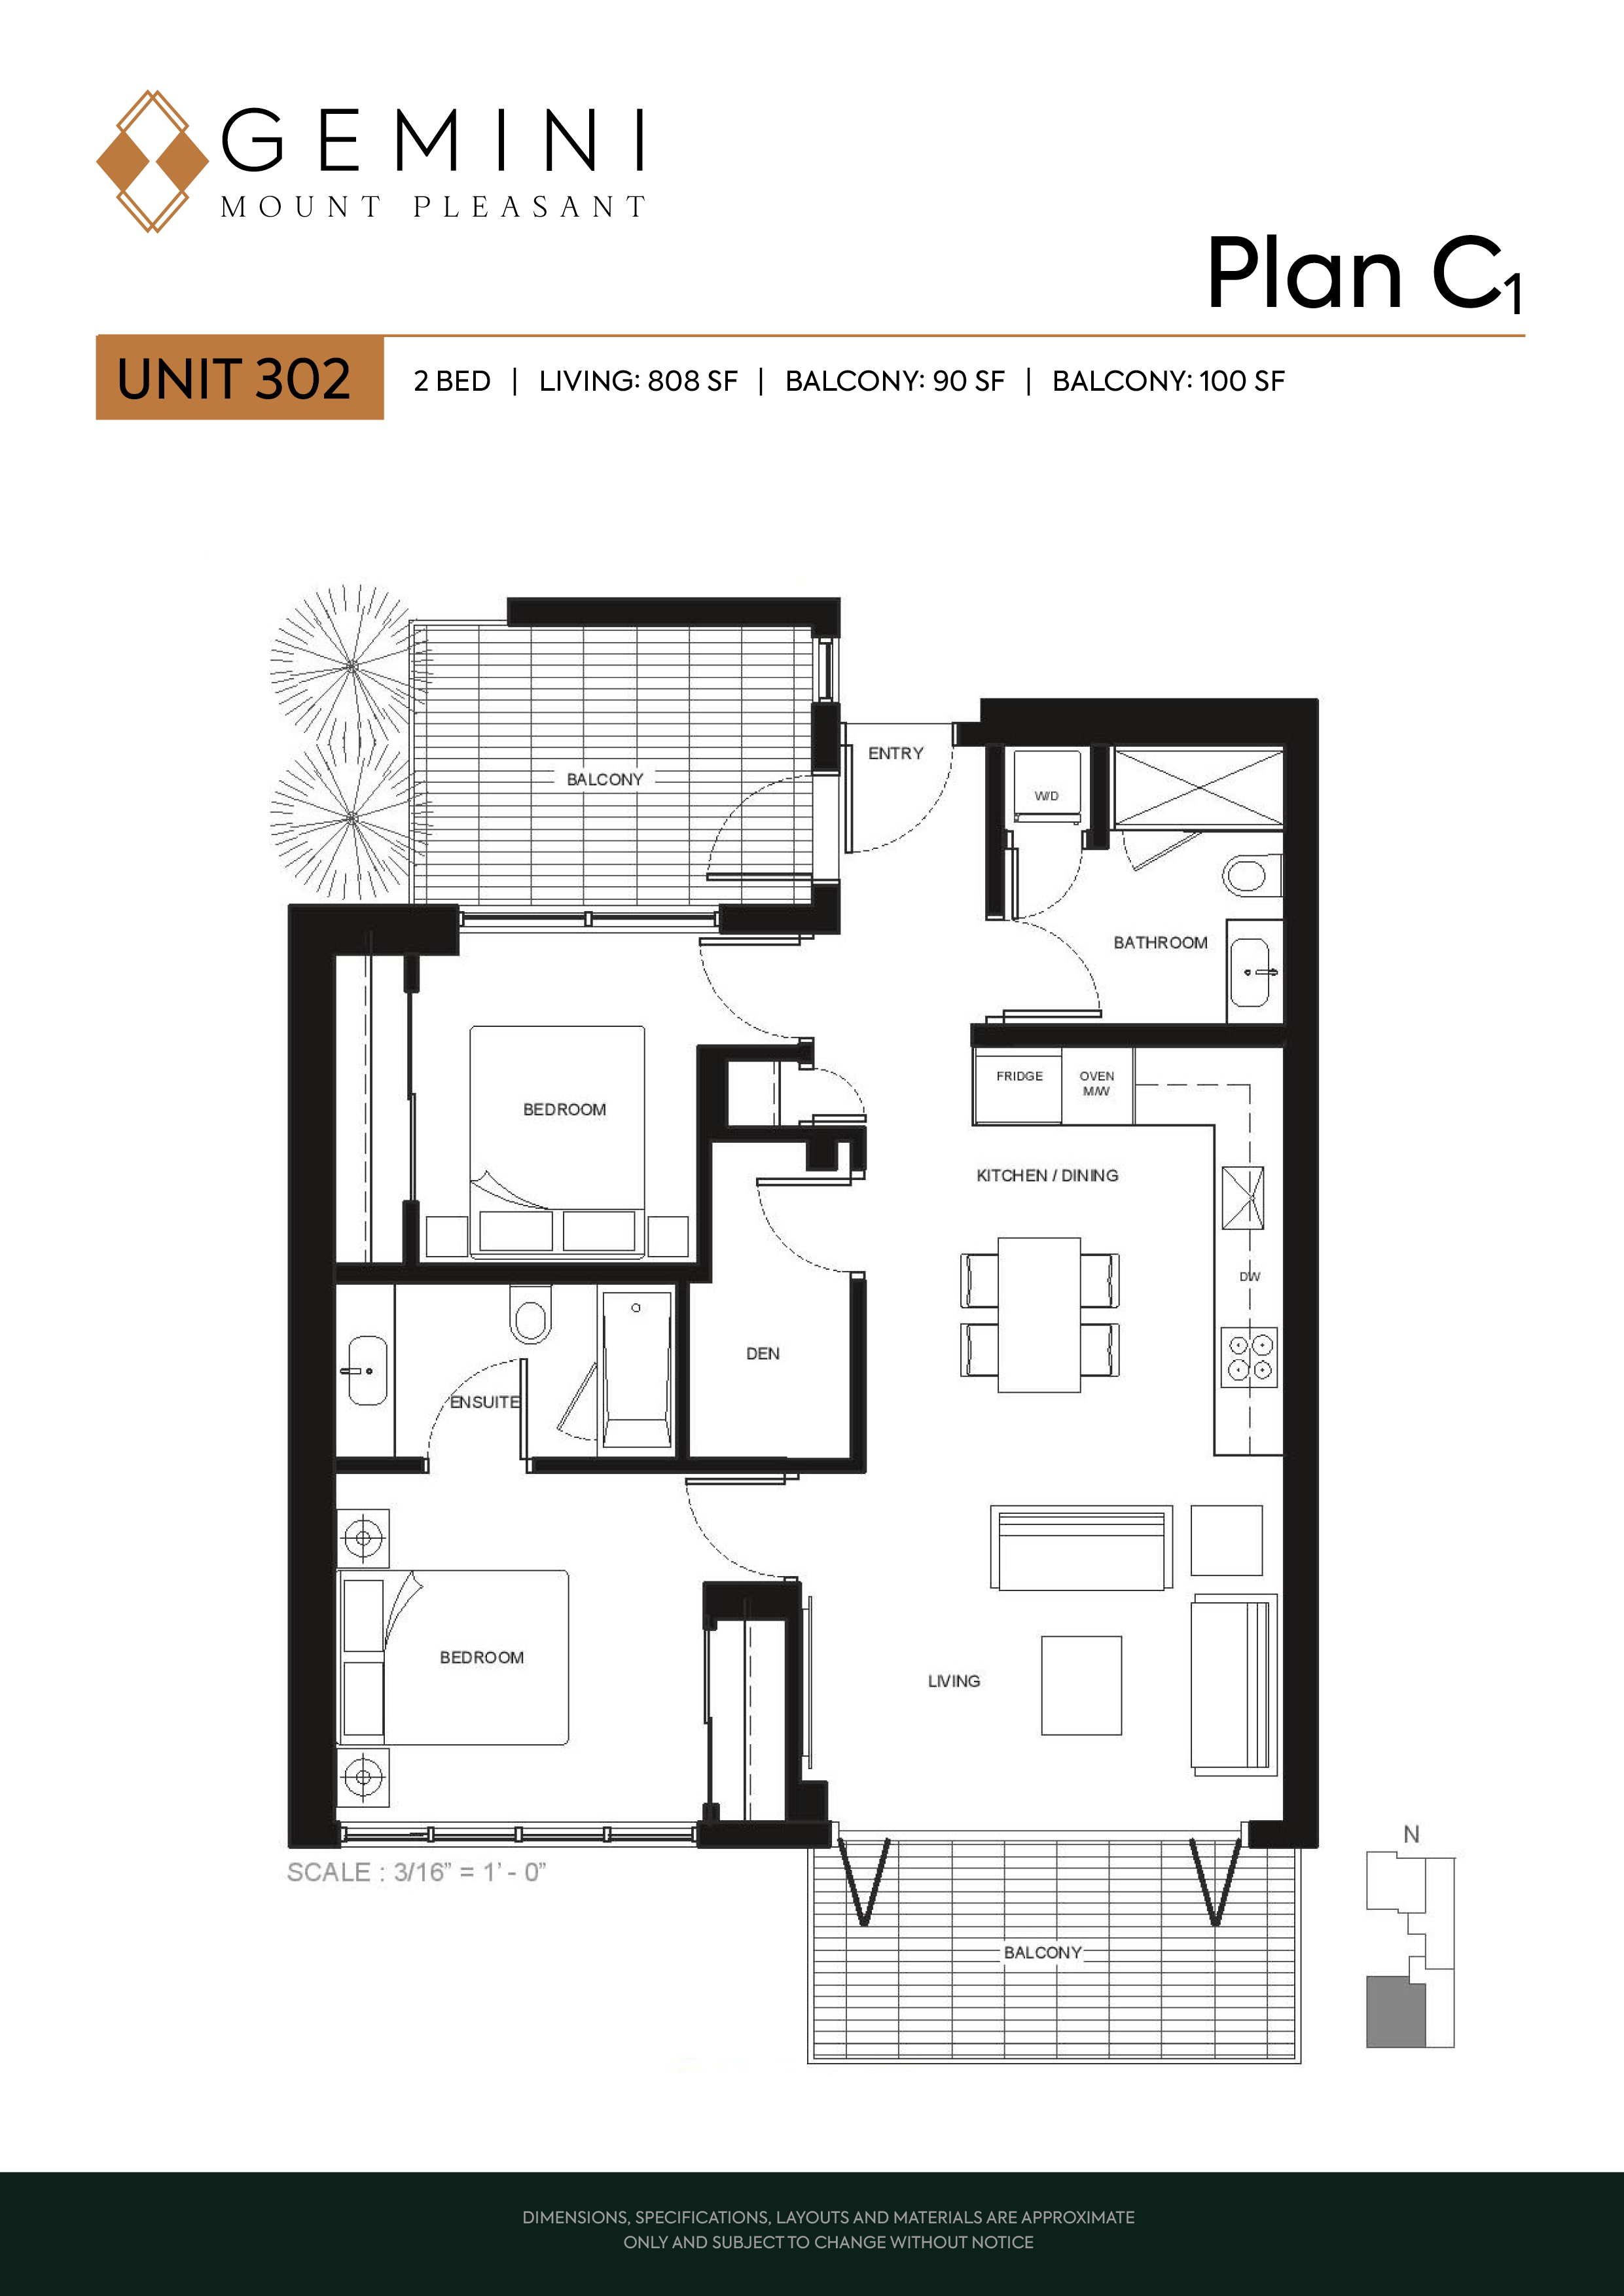 Plan C1 Floor Plan of Gemini Mount Pleasant Condos with undefined beds